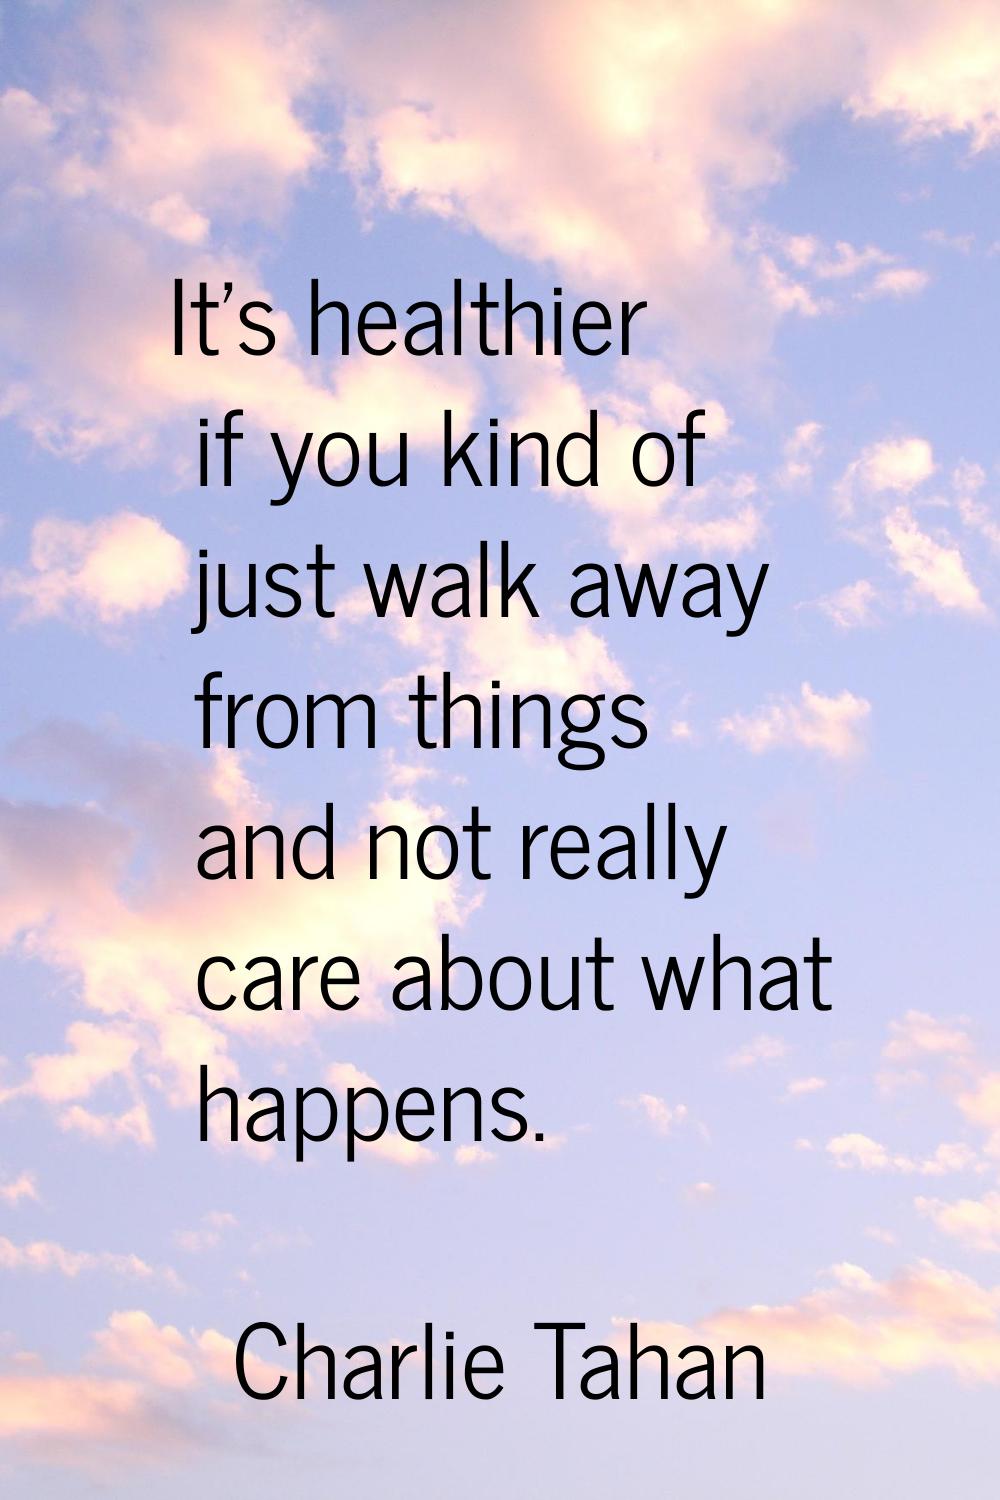 It's healthier if you kind of just walk away from things and not really care about what happens.